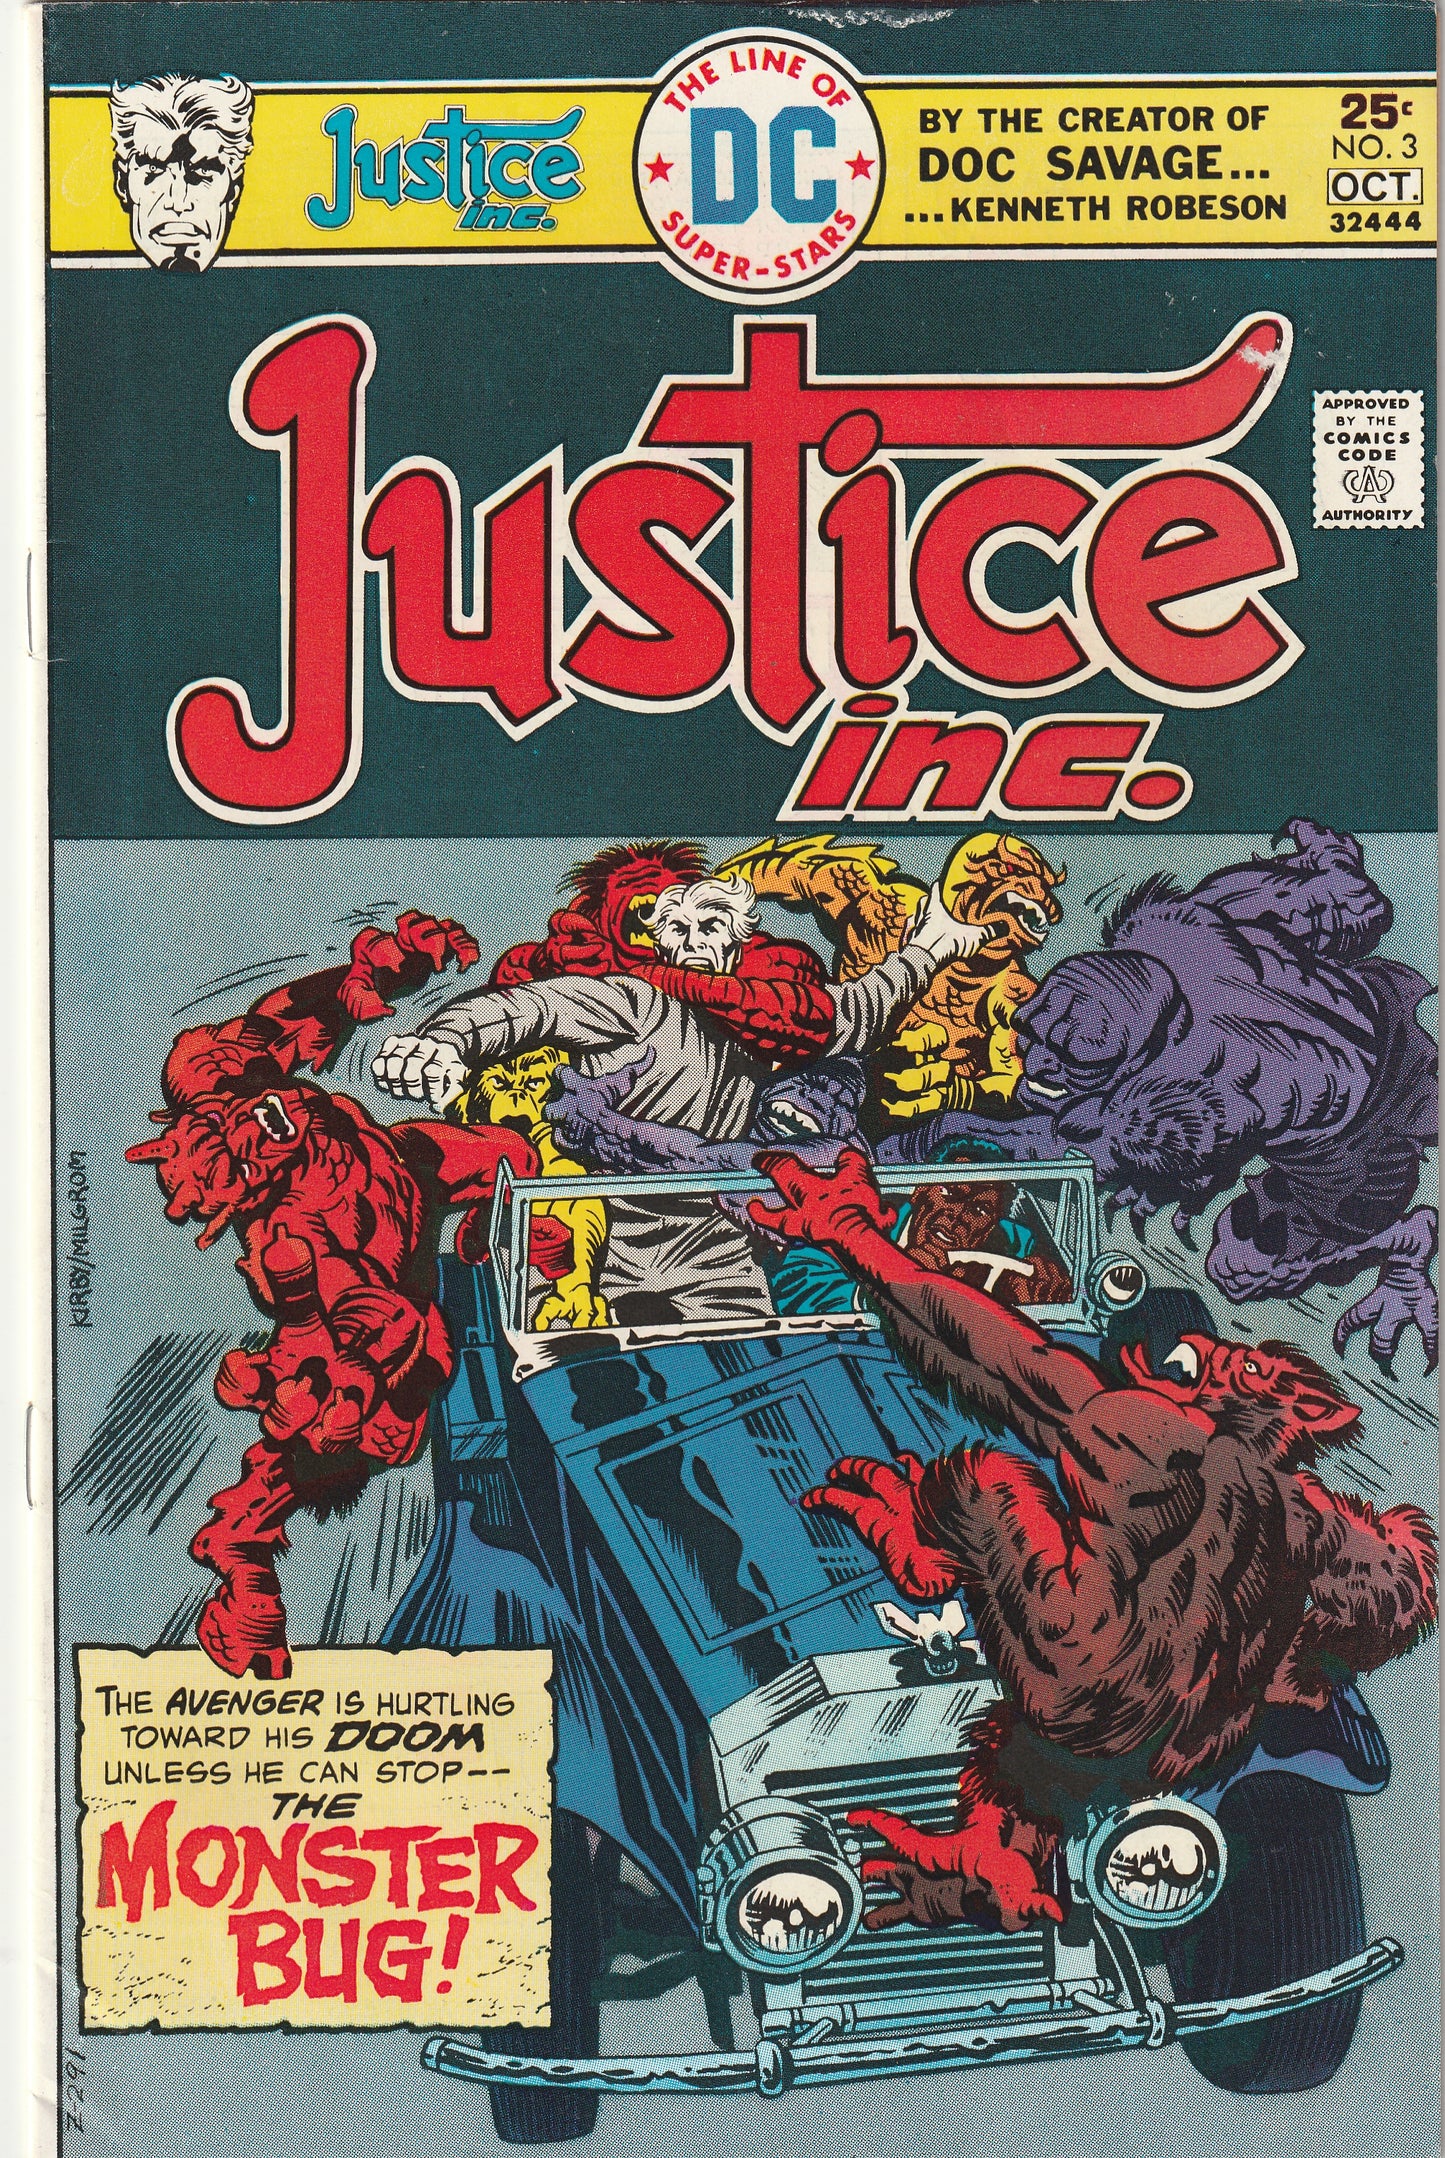 Justice Inc. #3 (1975) - Jack Kirby cover/art